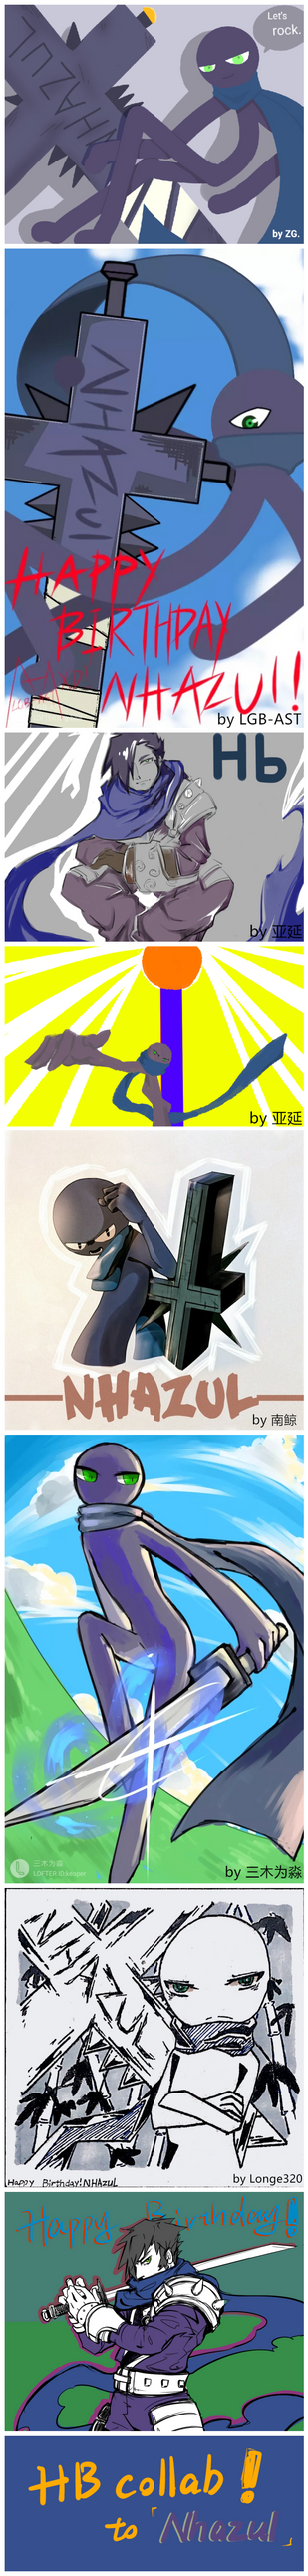 HB collab to Nhazul!